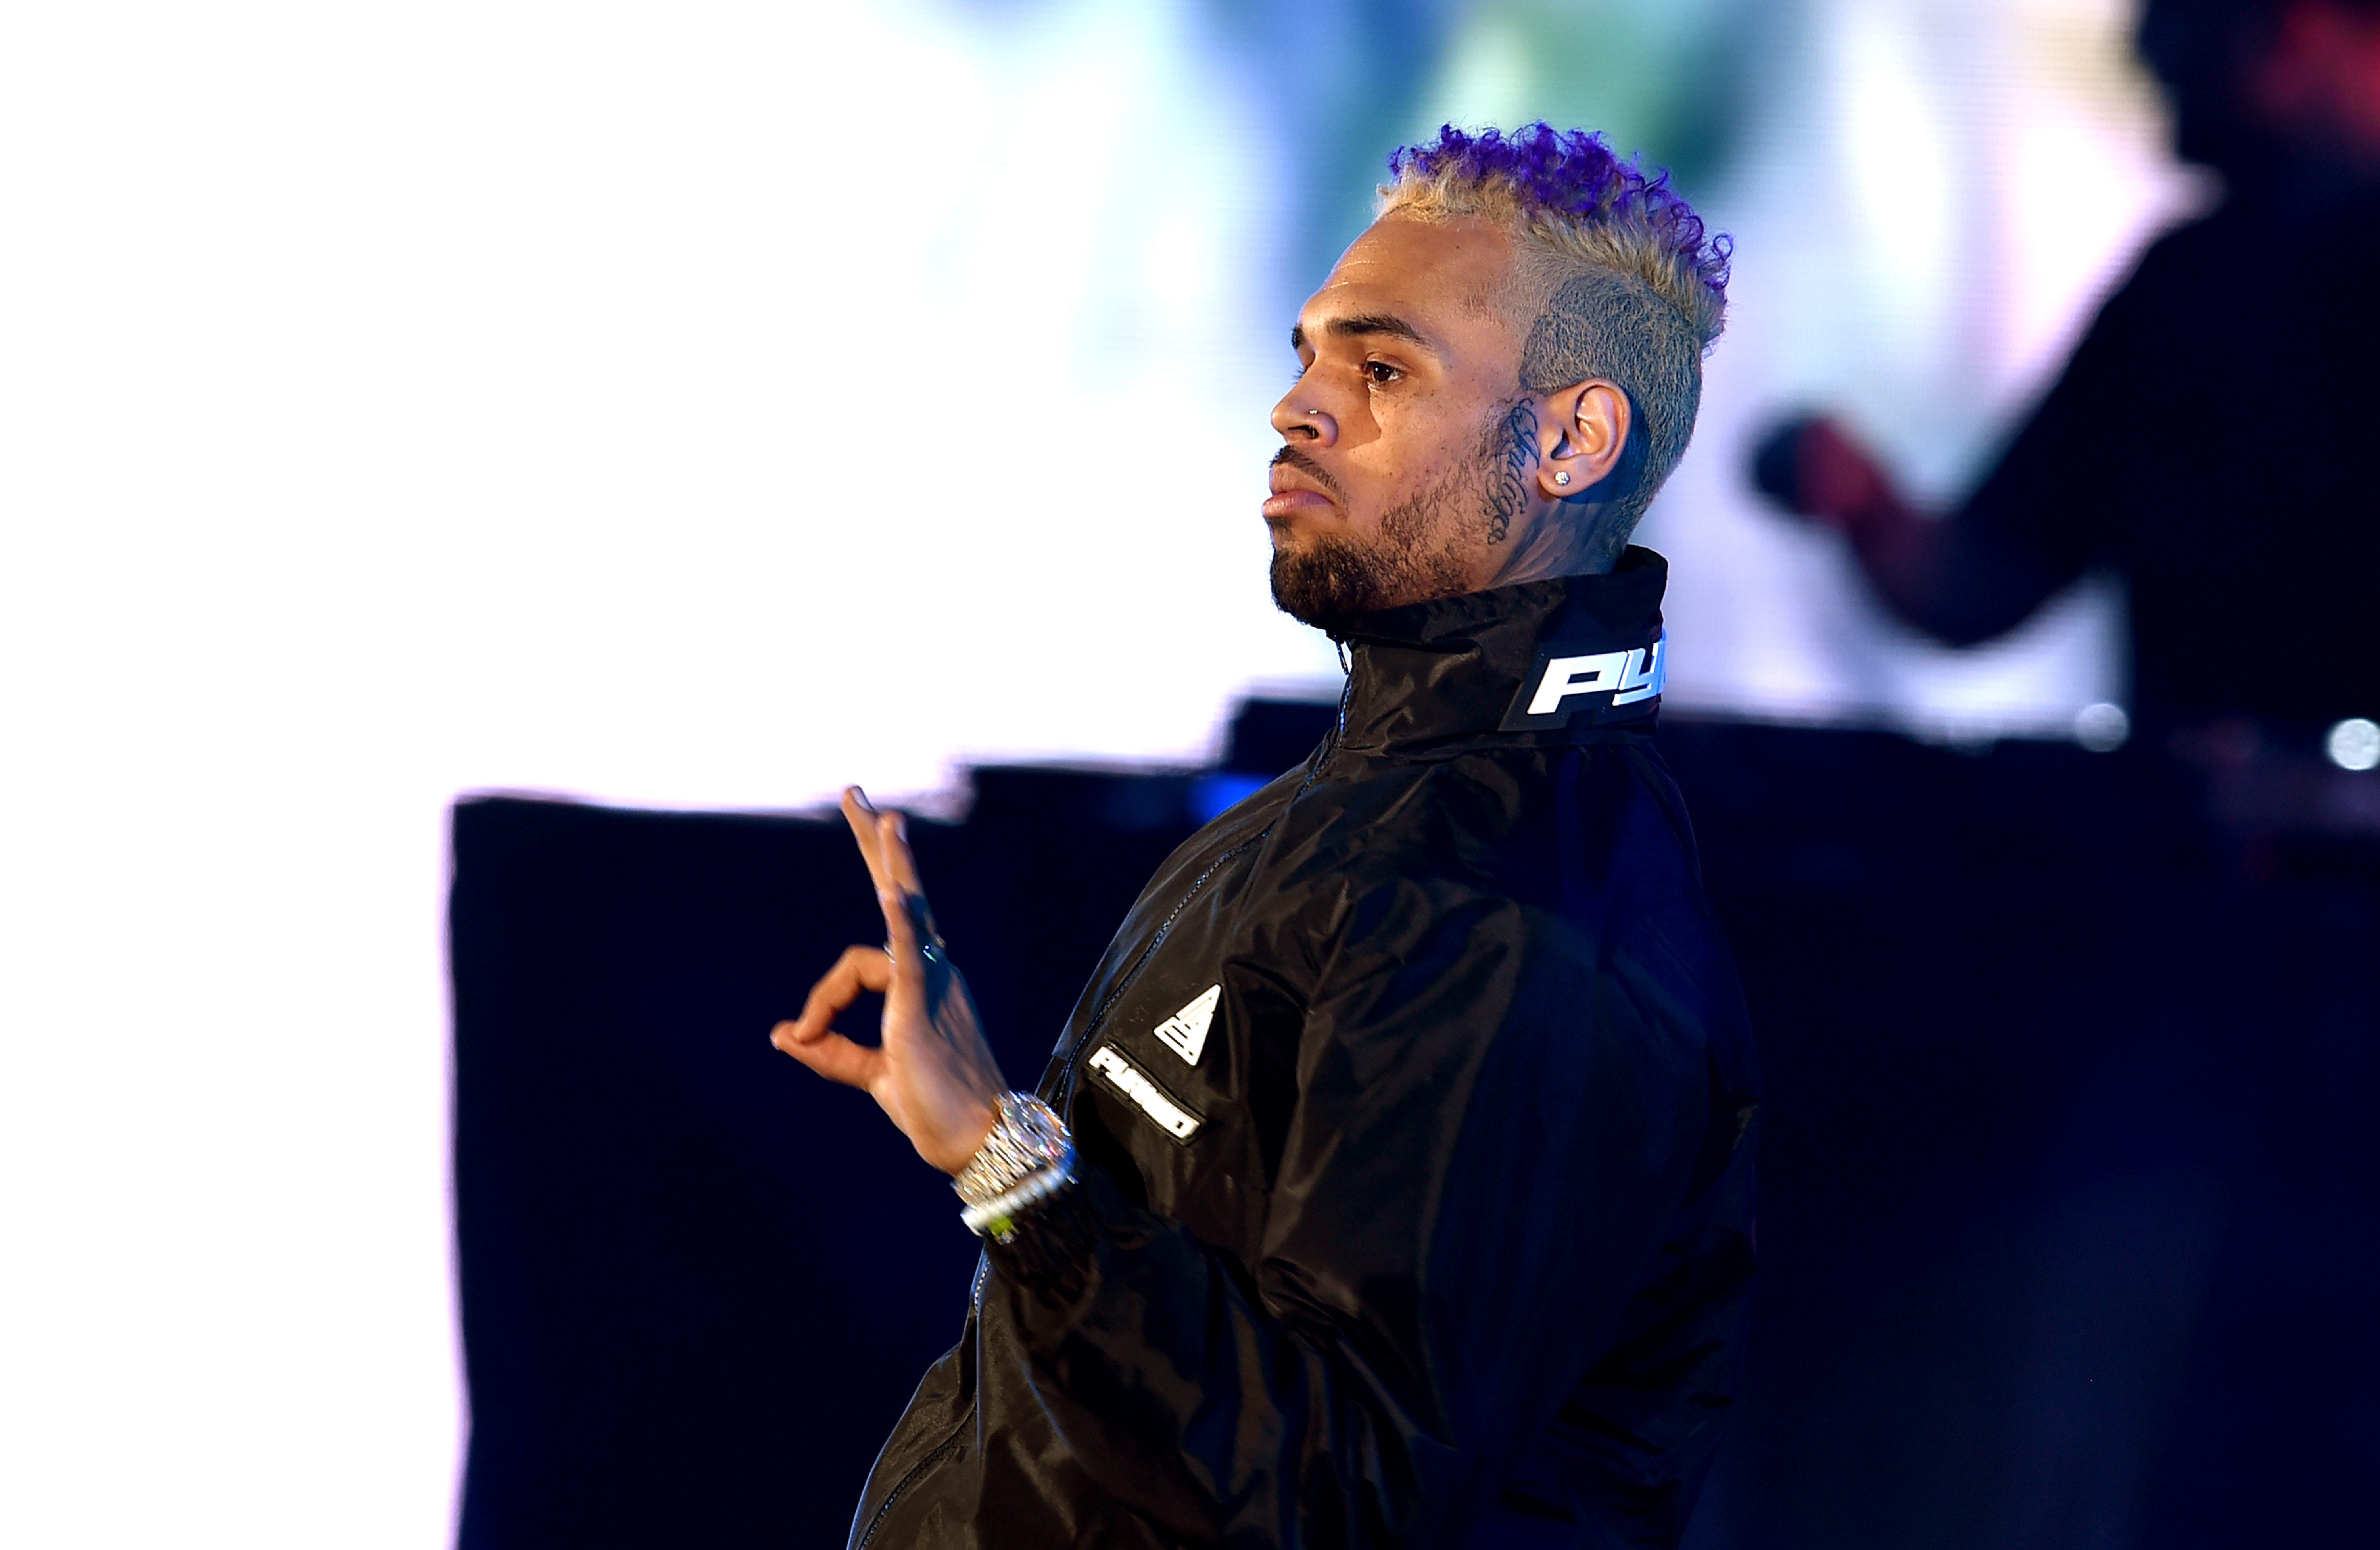 Chris Brown Enjoys Steamy Kiss With Dancer Mid-Performance